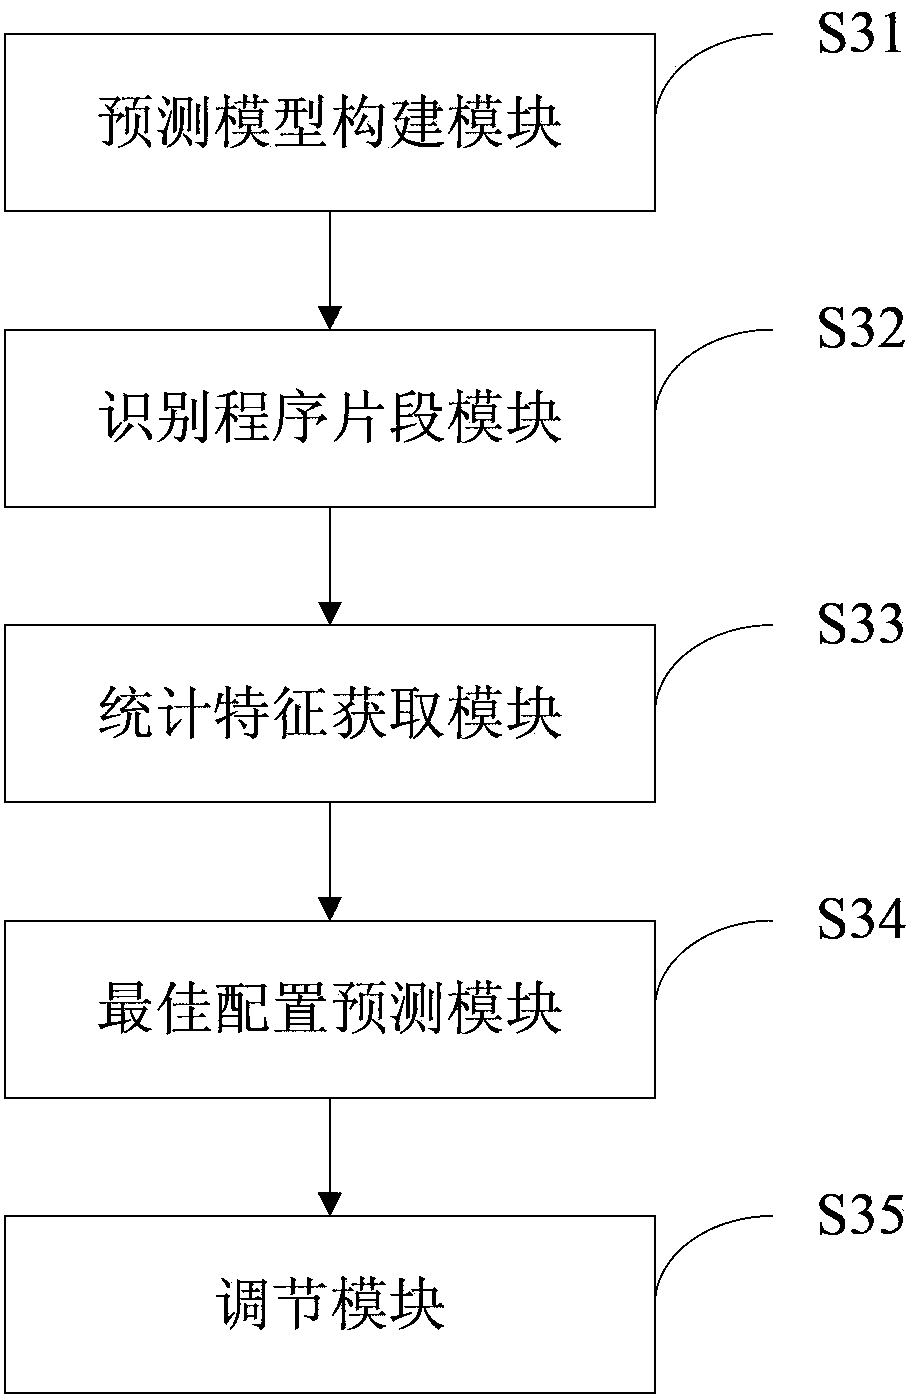 Method and system for reducing soft error rate of processor